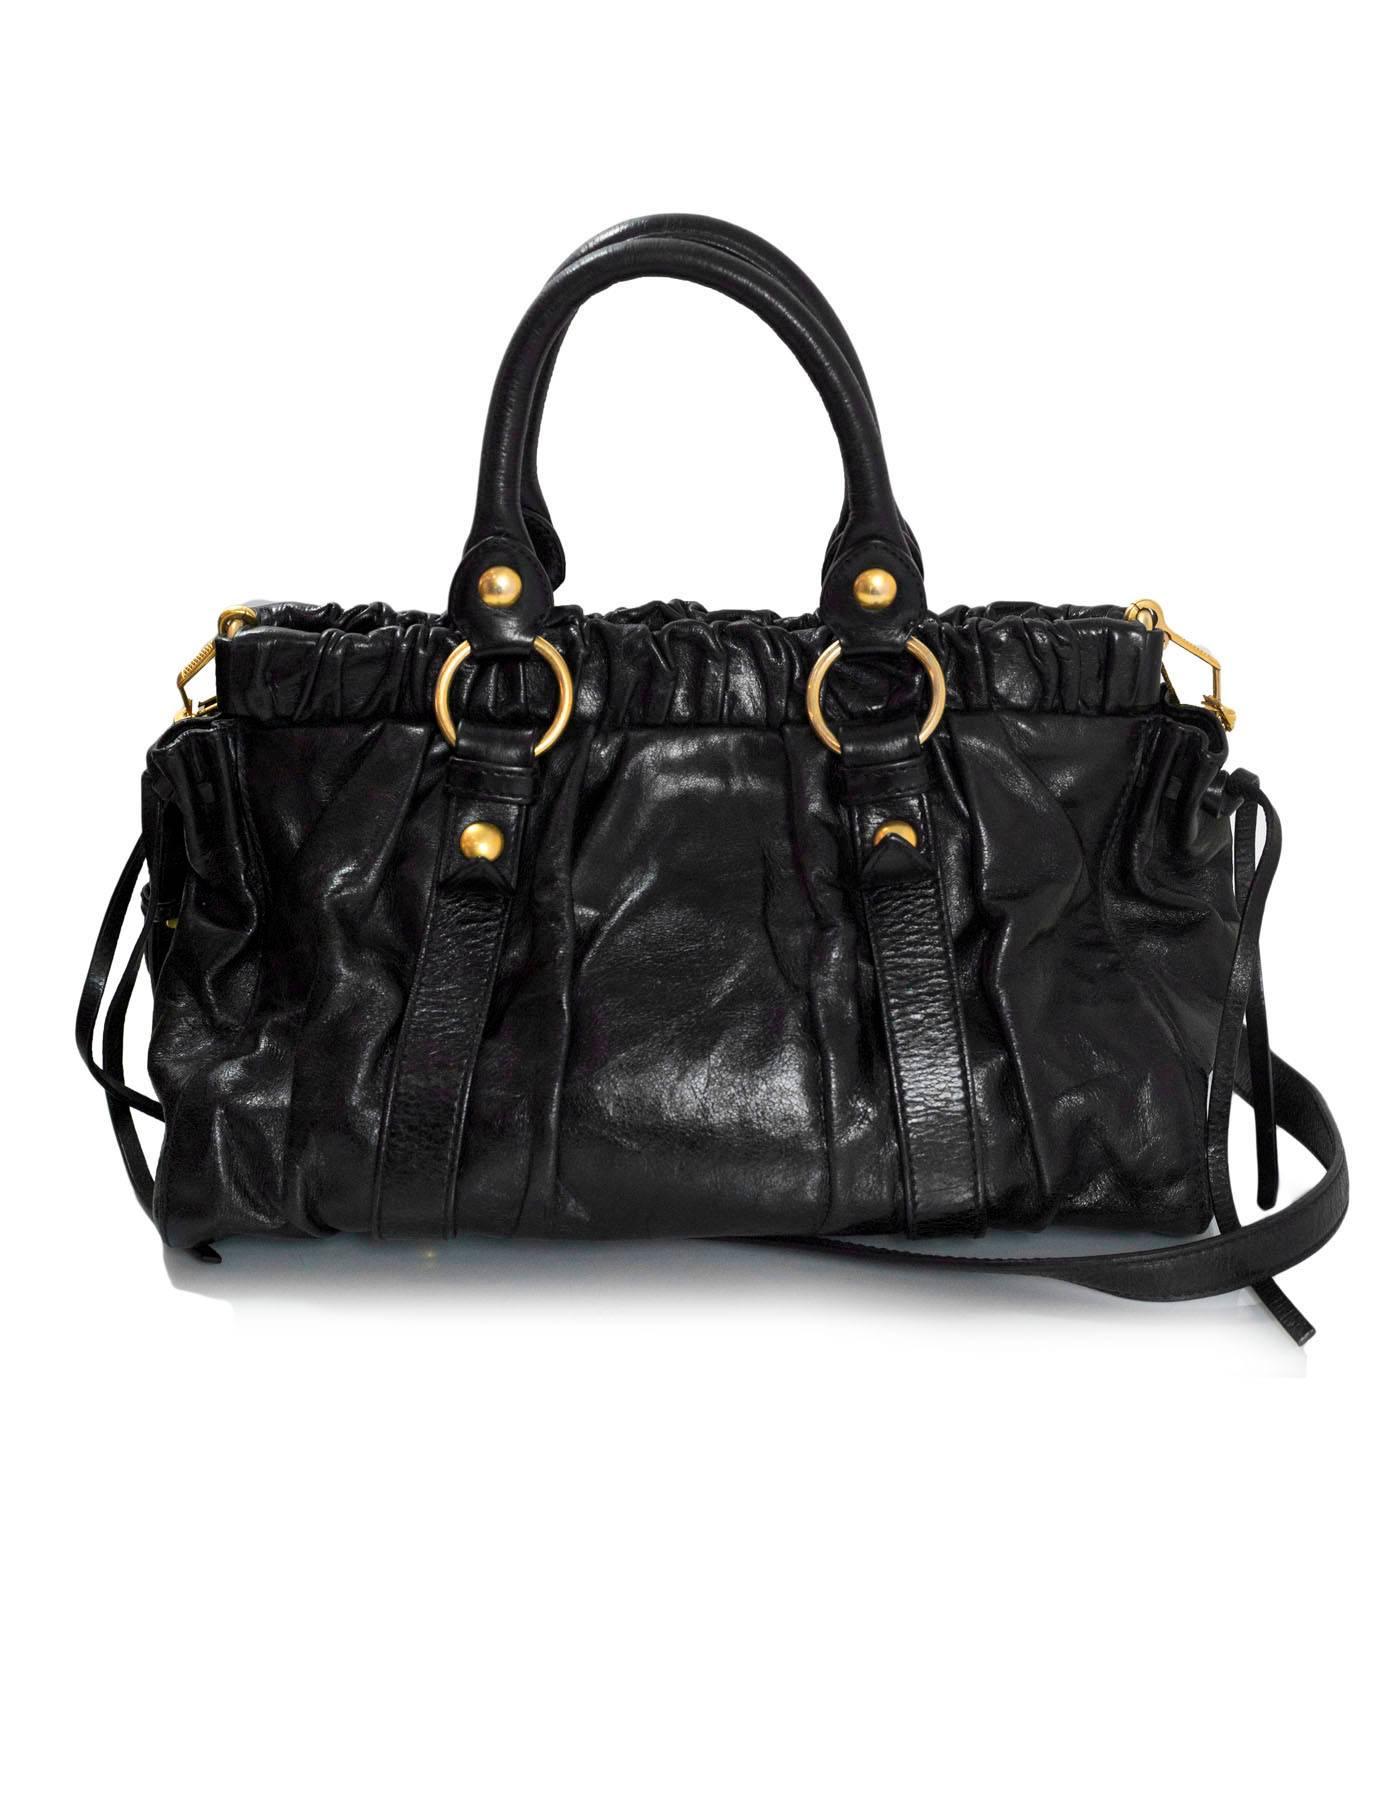 Miu Miu Black Ruched Leather Satchel Bag with DB In Excellent Condition In New York, NY